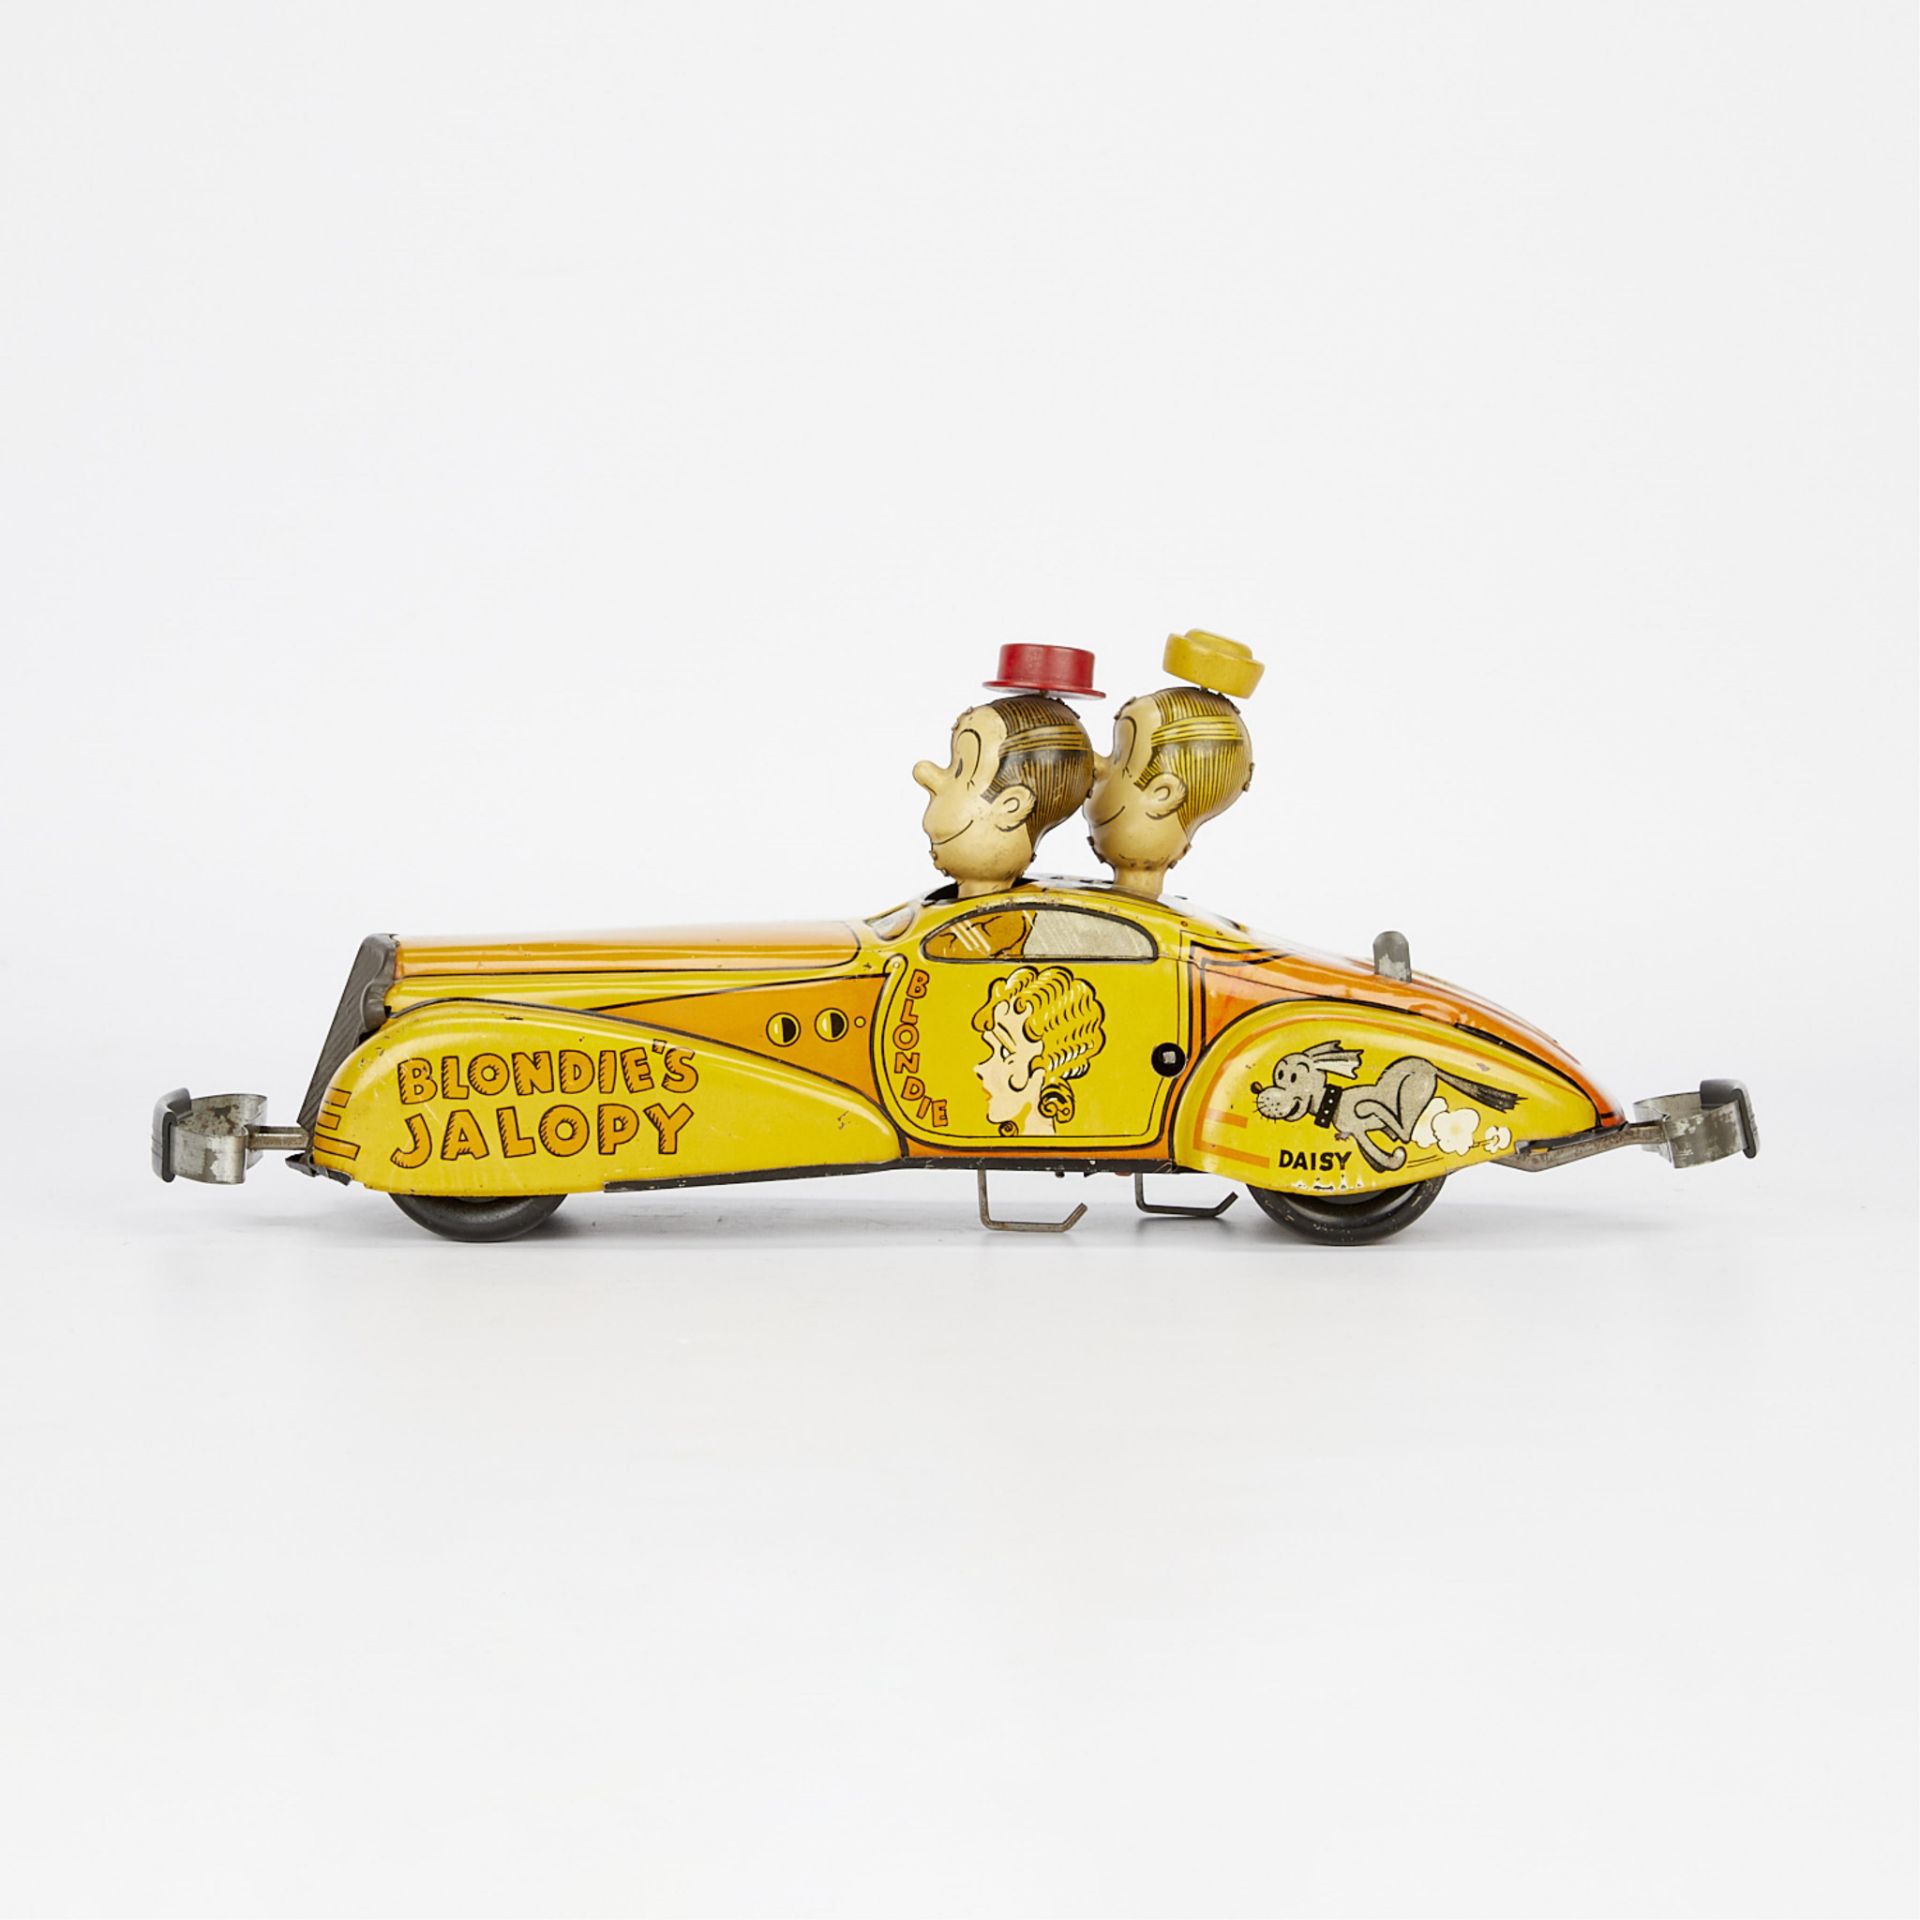 Marx Lithographed Tin Wind-Up Blondie's Jalopy Toy - Image 4 of 11